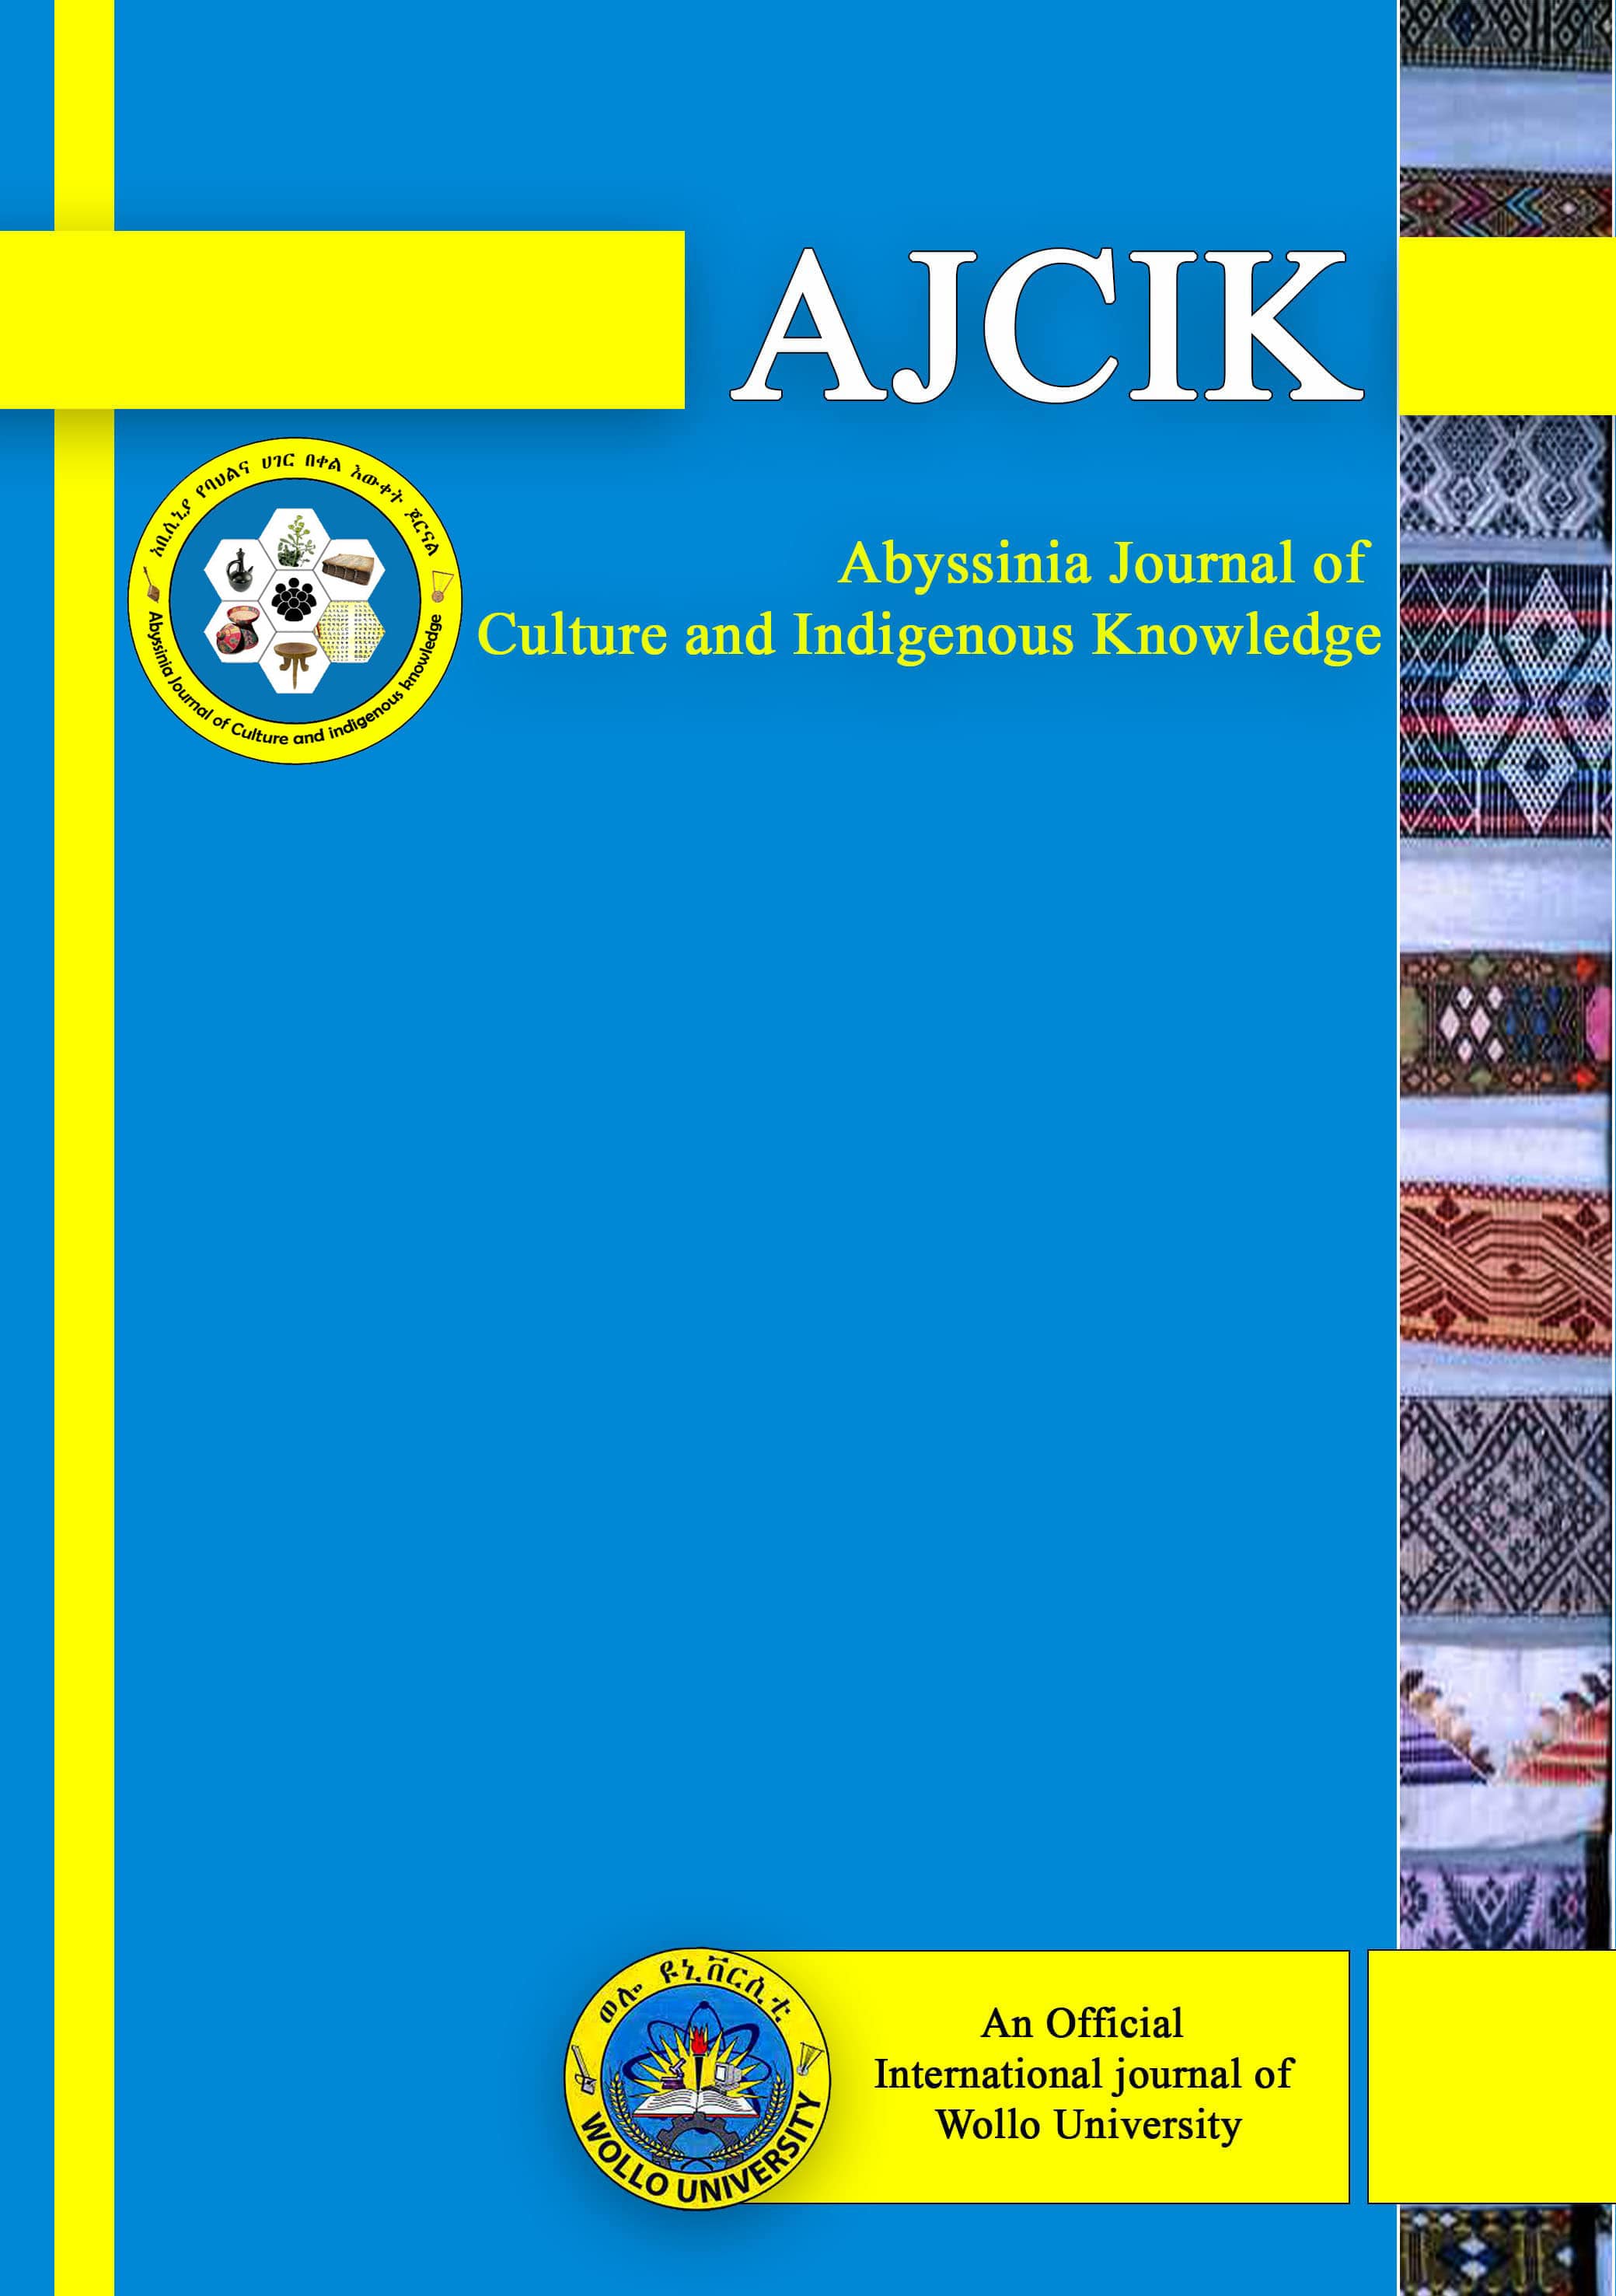 The Abyssinia Journal of Culture and Indigenous Knowledge (AJCIK)